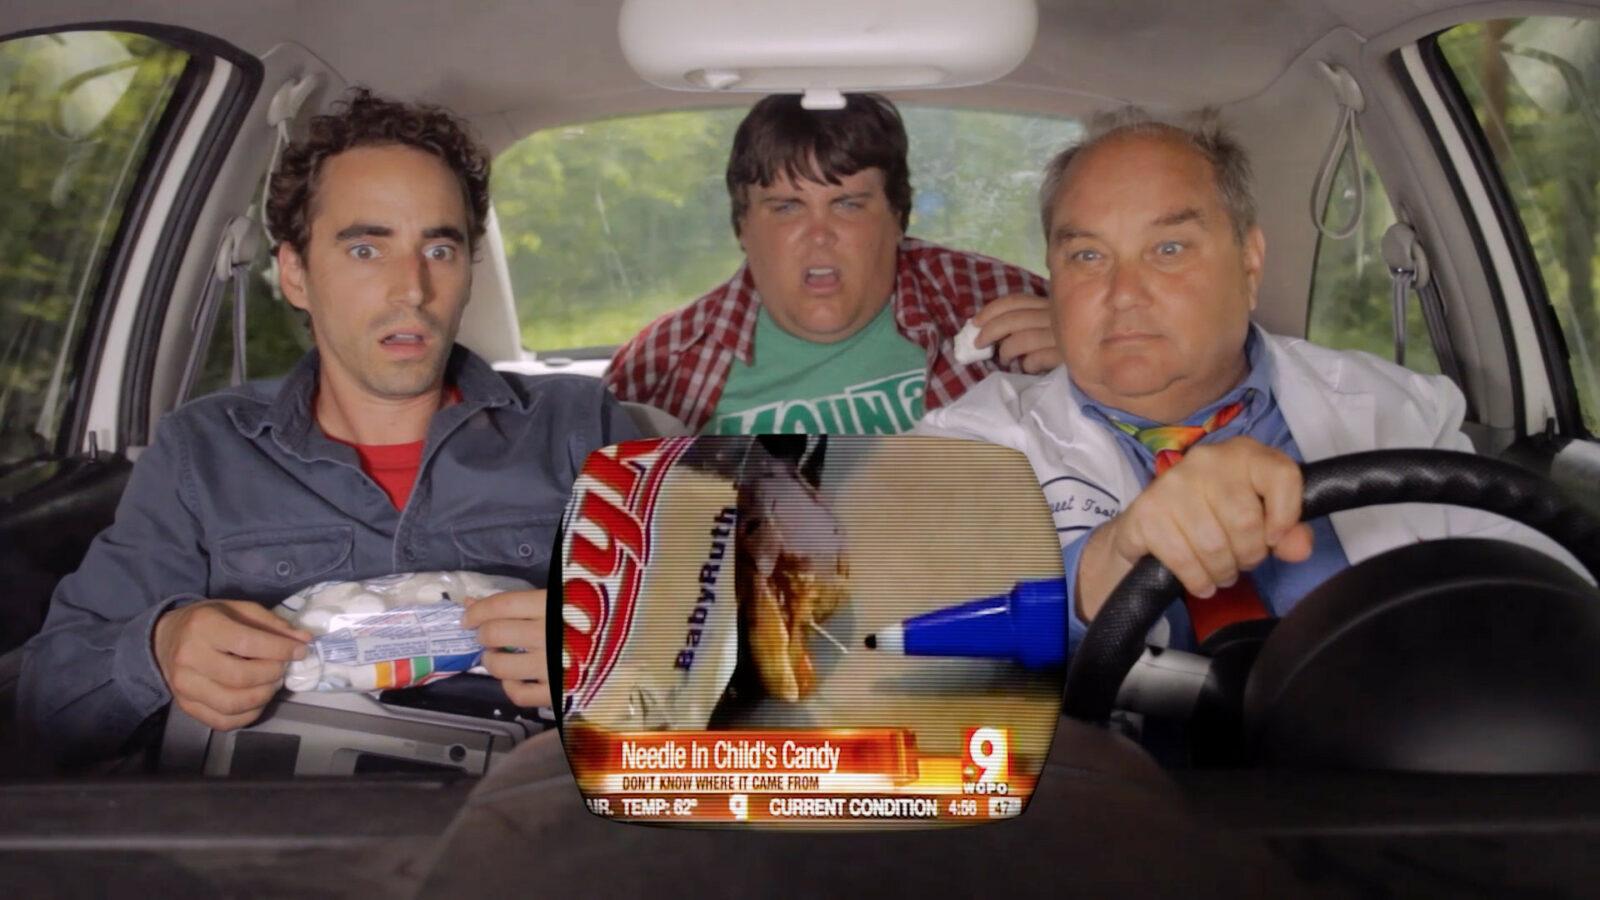 3 guys in a car watching a tv in the car